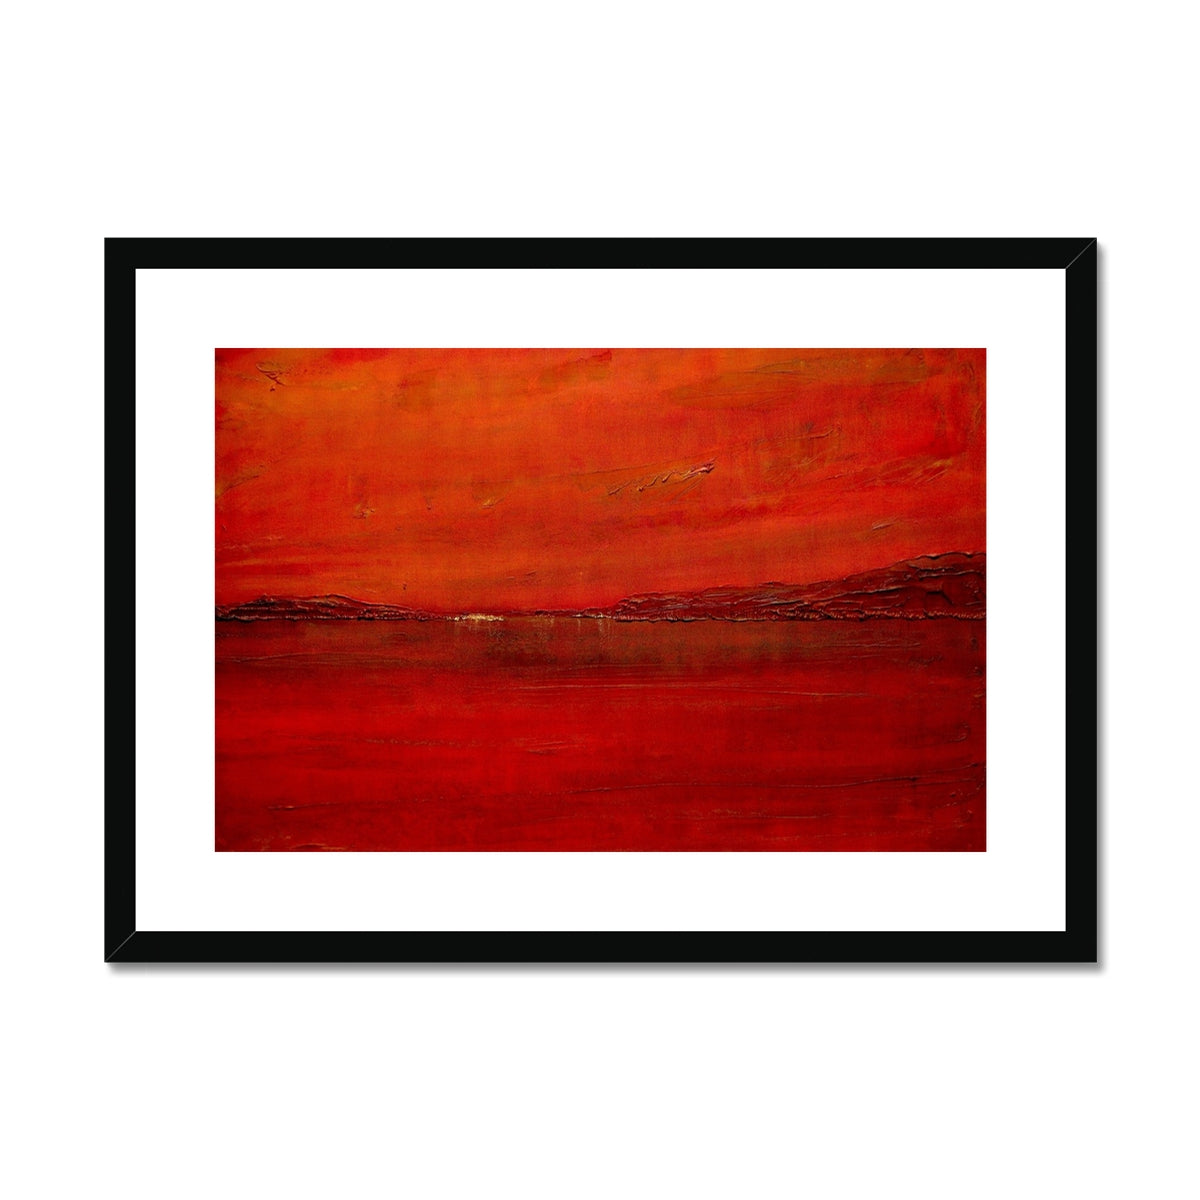 Deep Loch Lomond Sunset Painting | Framed & Mounted Prints From Scotland-Framed & Mounted Prints-Scottish Lochs & Mountains Art Gallery-A2 Landscape-Black Frame-Paintings, Prints, Homeware, Art Gifts From Scotland By Scottish Artist Kevin Hunter